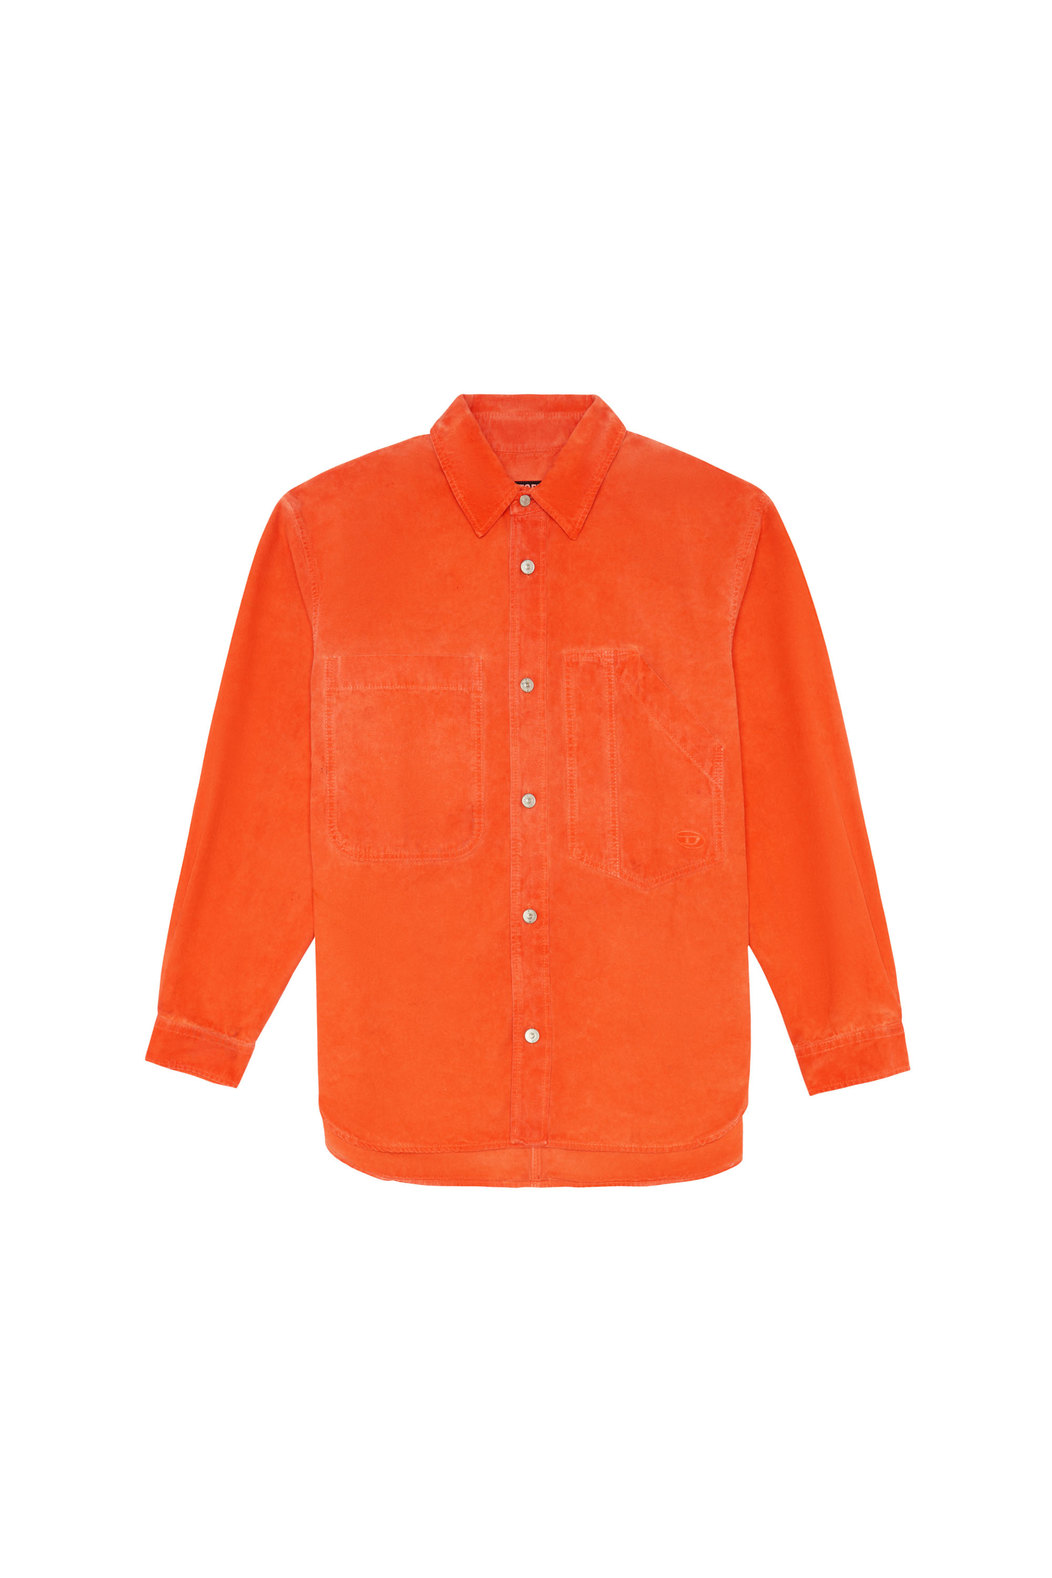 Workwear shirt in treated canvas